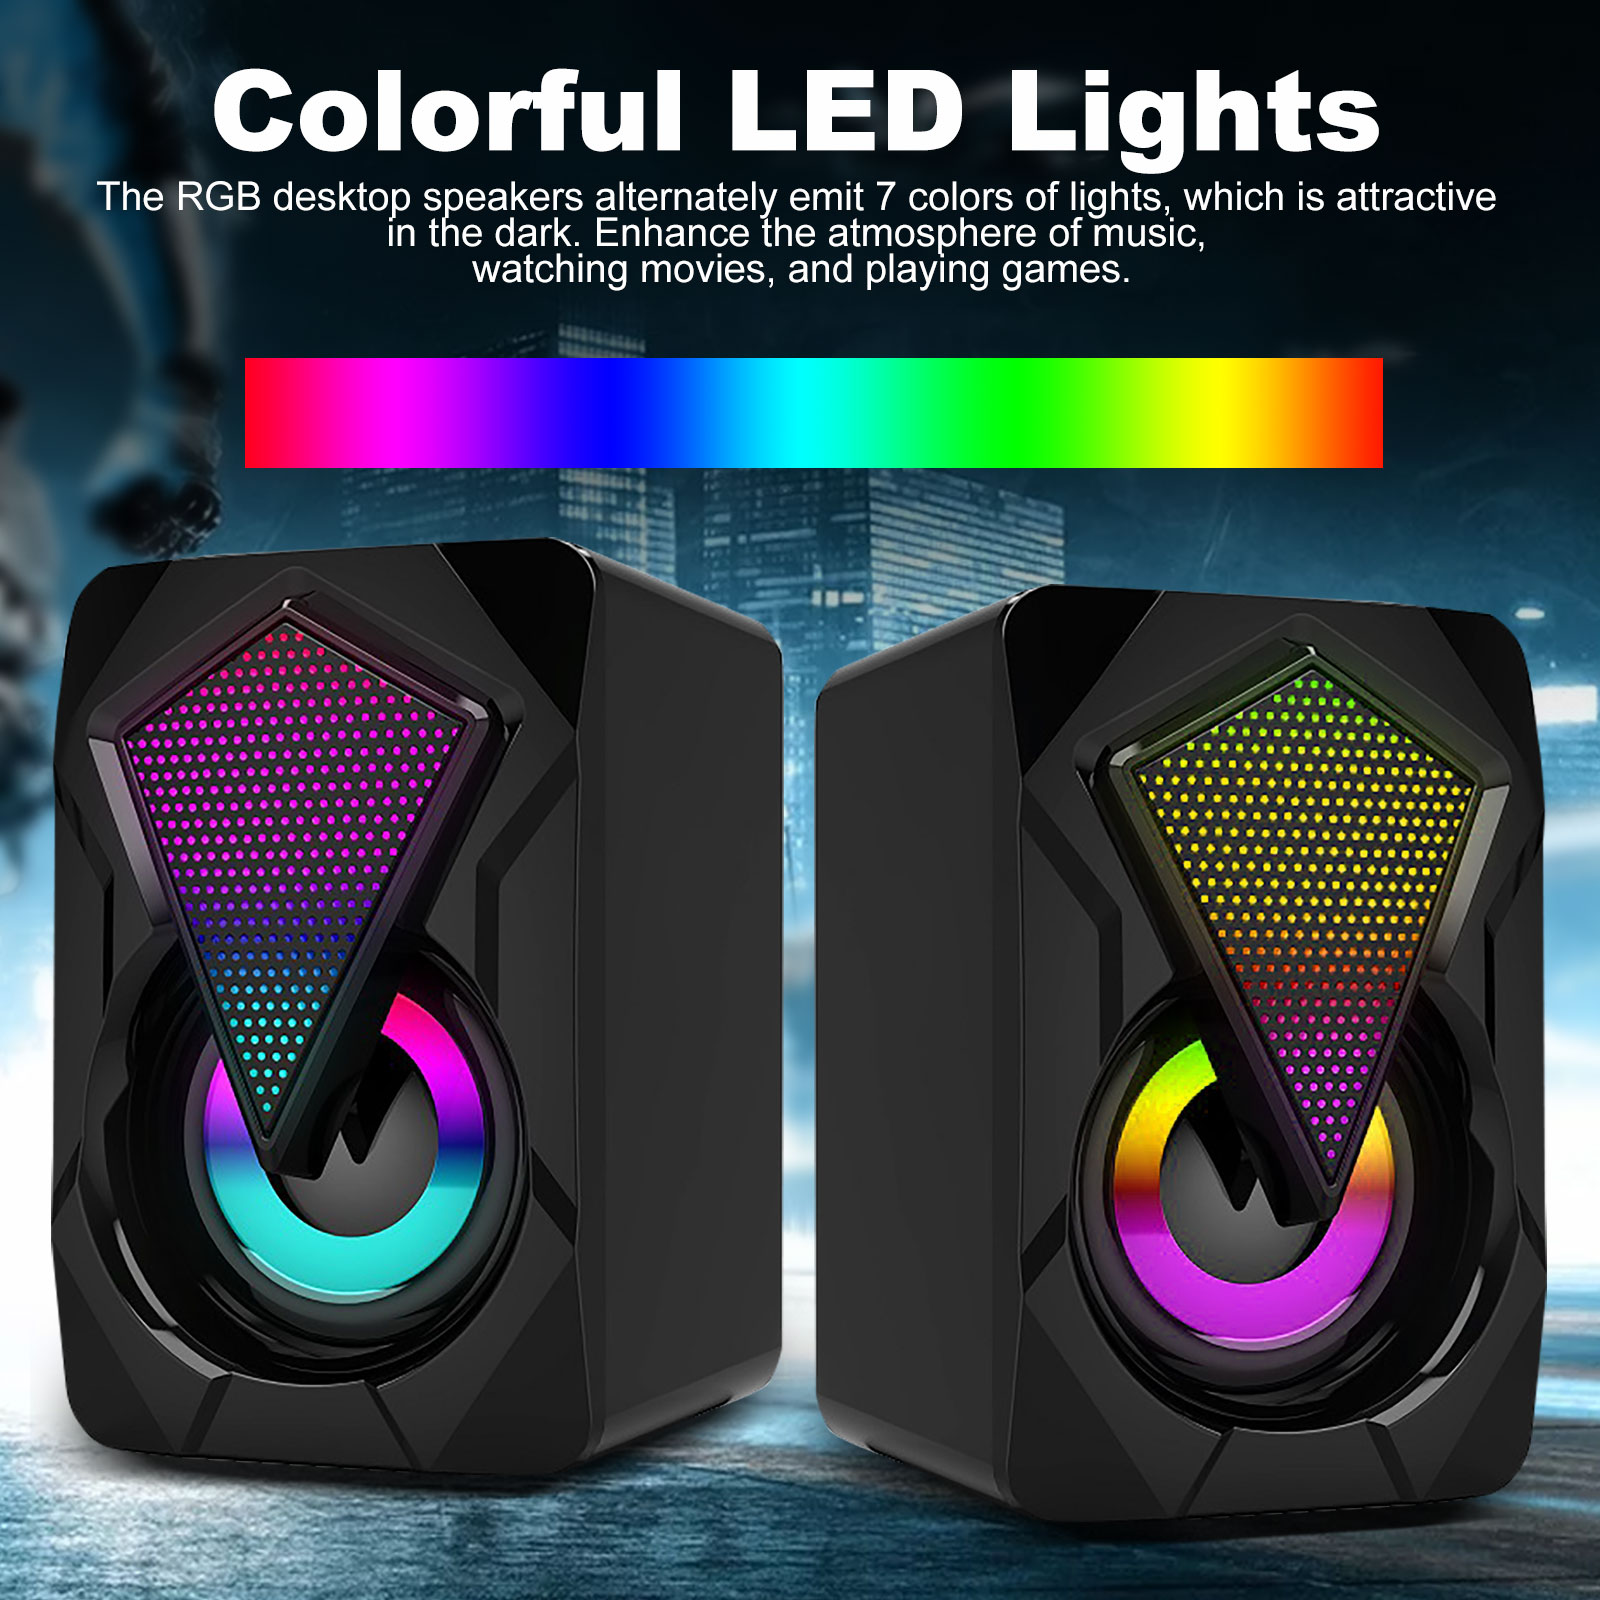 Computer Speakers RGB Gaming Speaker USB Powered Stereo 2.0 Volume Control PC Speakers with LED Light, Dual-Channel Multimedia Speakers for Computer Desktop Laptop PC Smartphone TV Game Machine(6W) - image 5 of 9